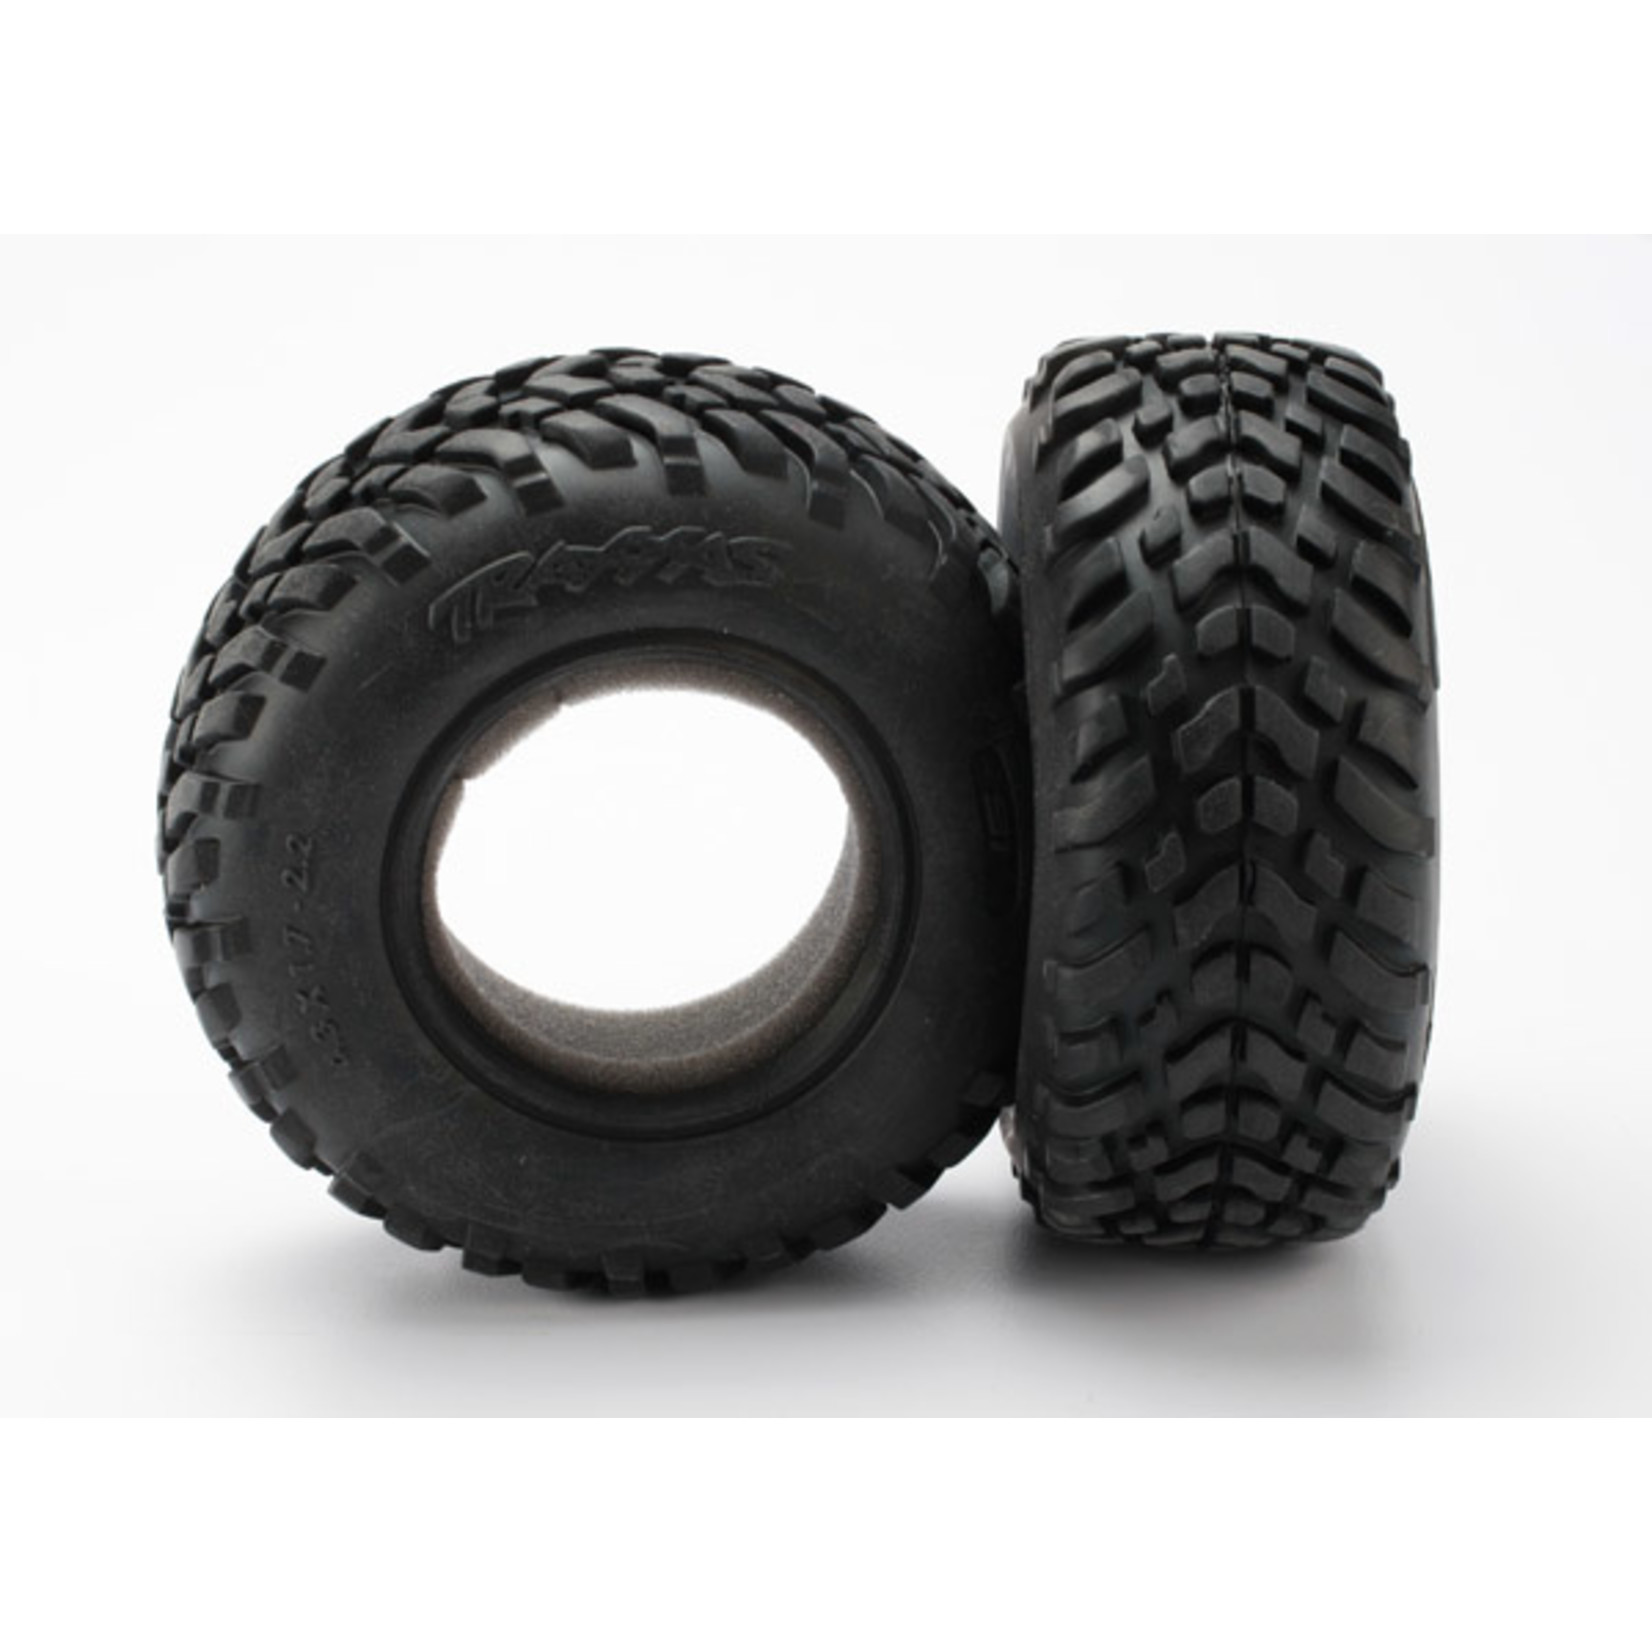 Traxxas 5871R - Tires, Ultra soft, S1 compound for off-roa